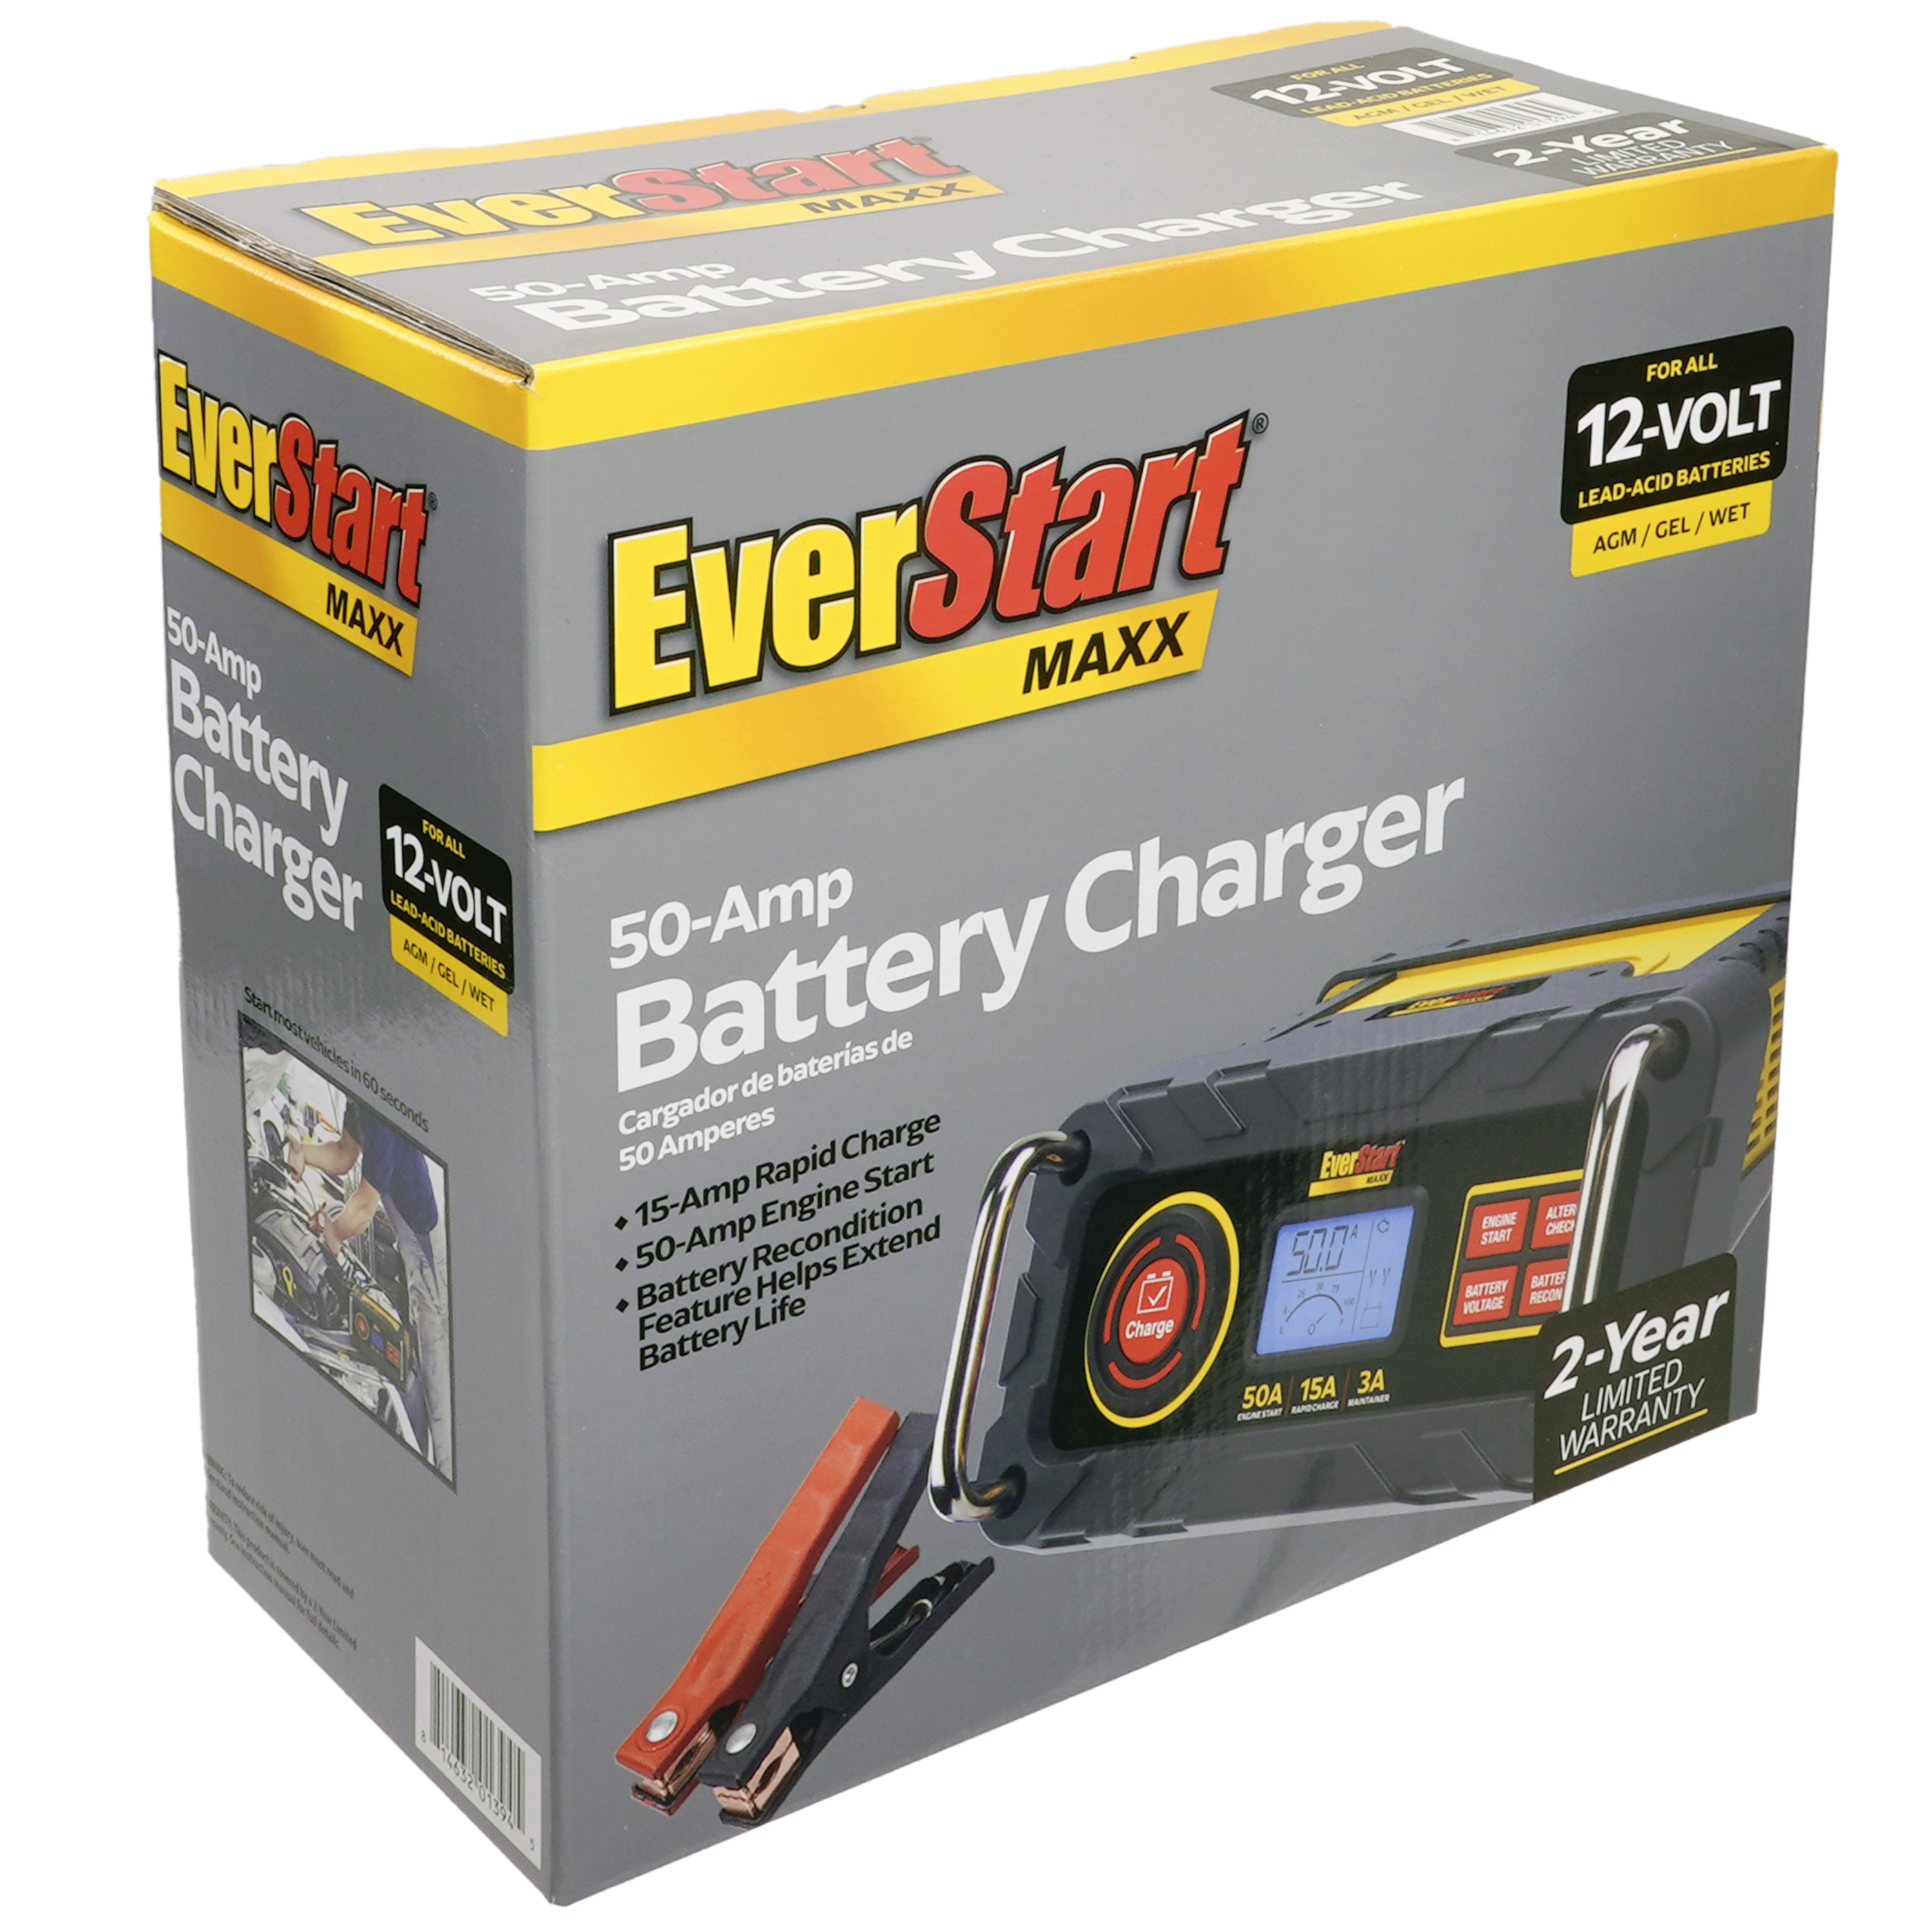 Everstart Maxx 15 Amp Automotive Battery Charger with 50 Amp Engine Start (BC50BE)-New - image 3 of 7